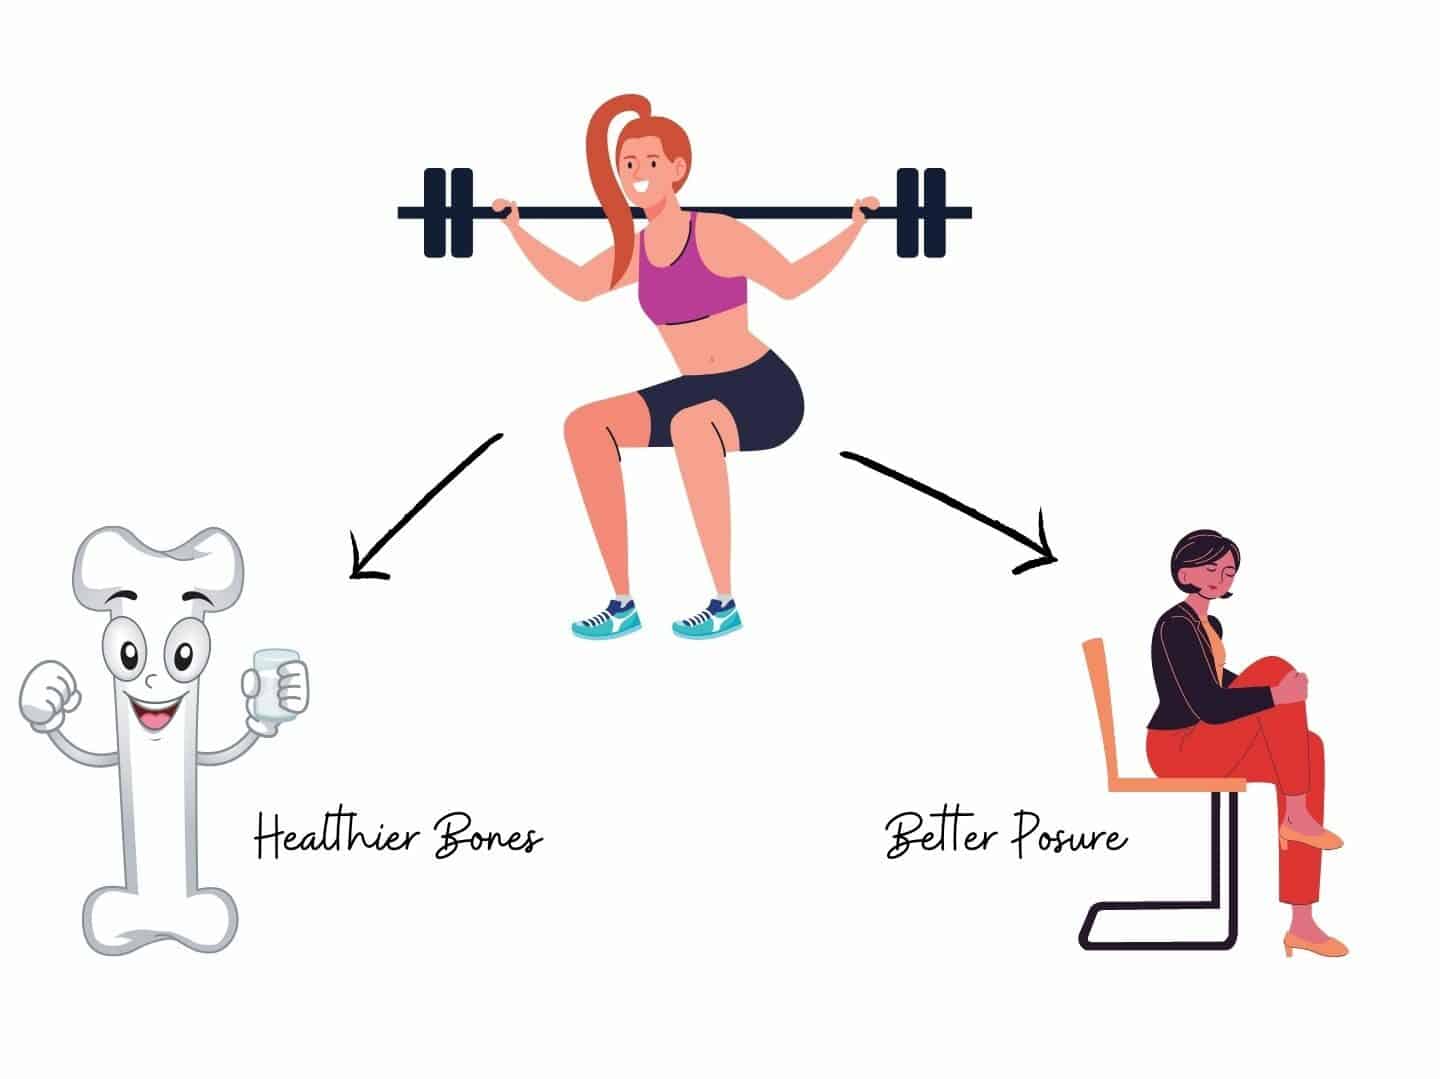 weight lifting lead to better bone health and posture